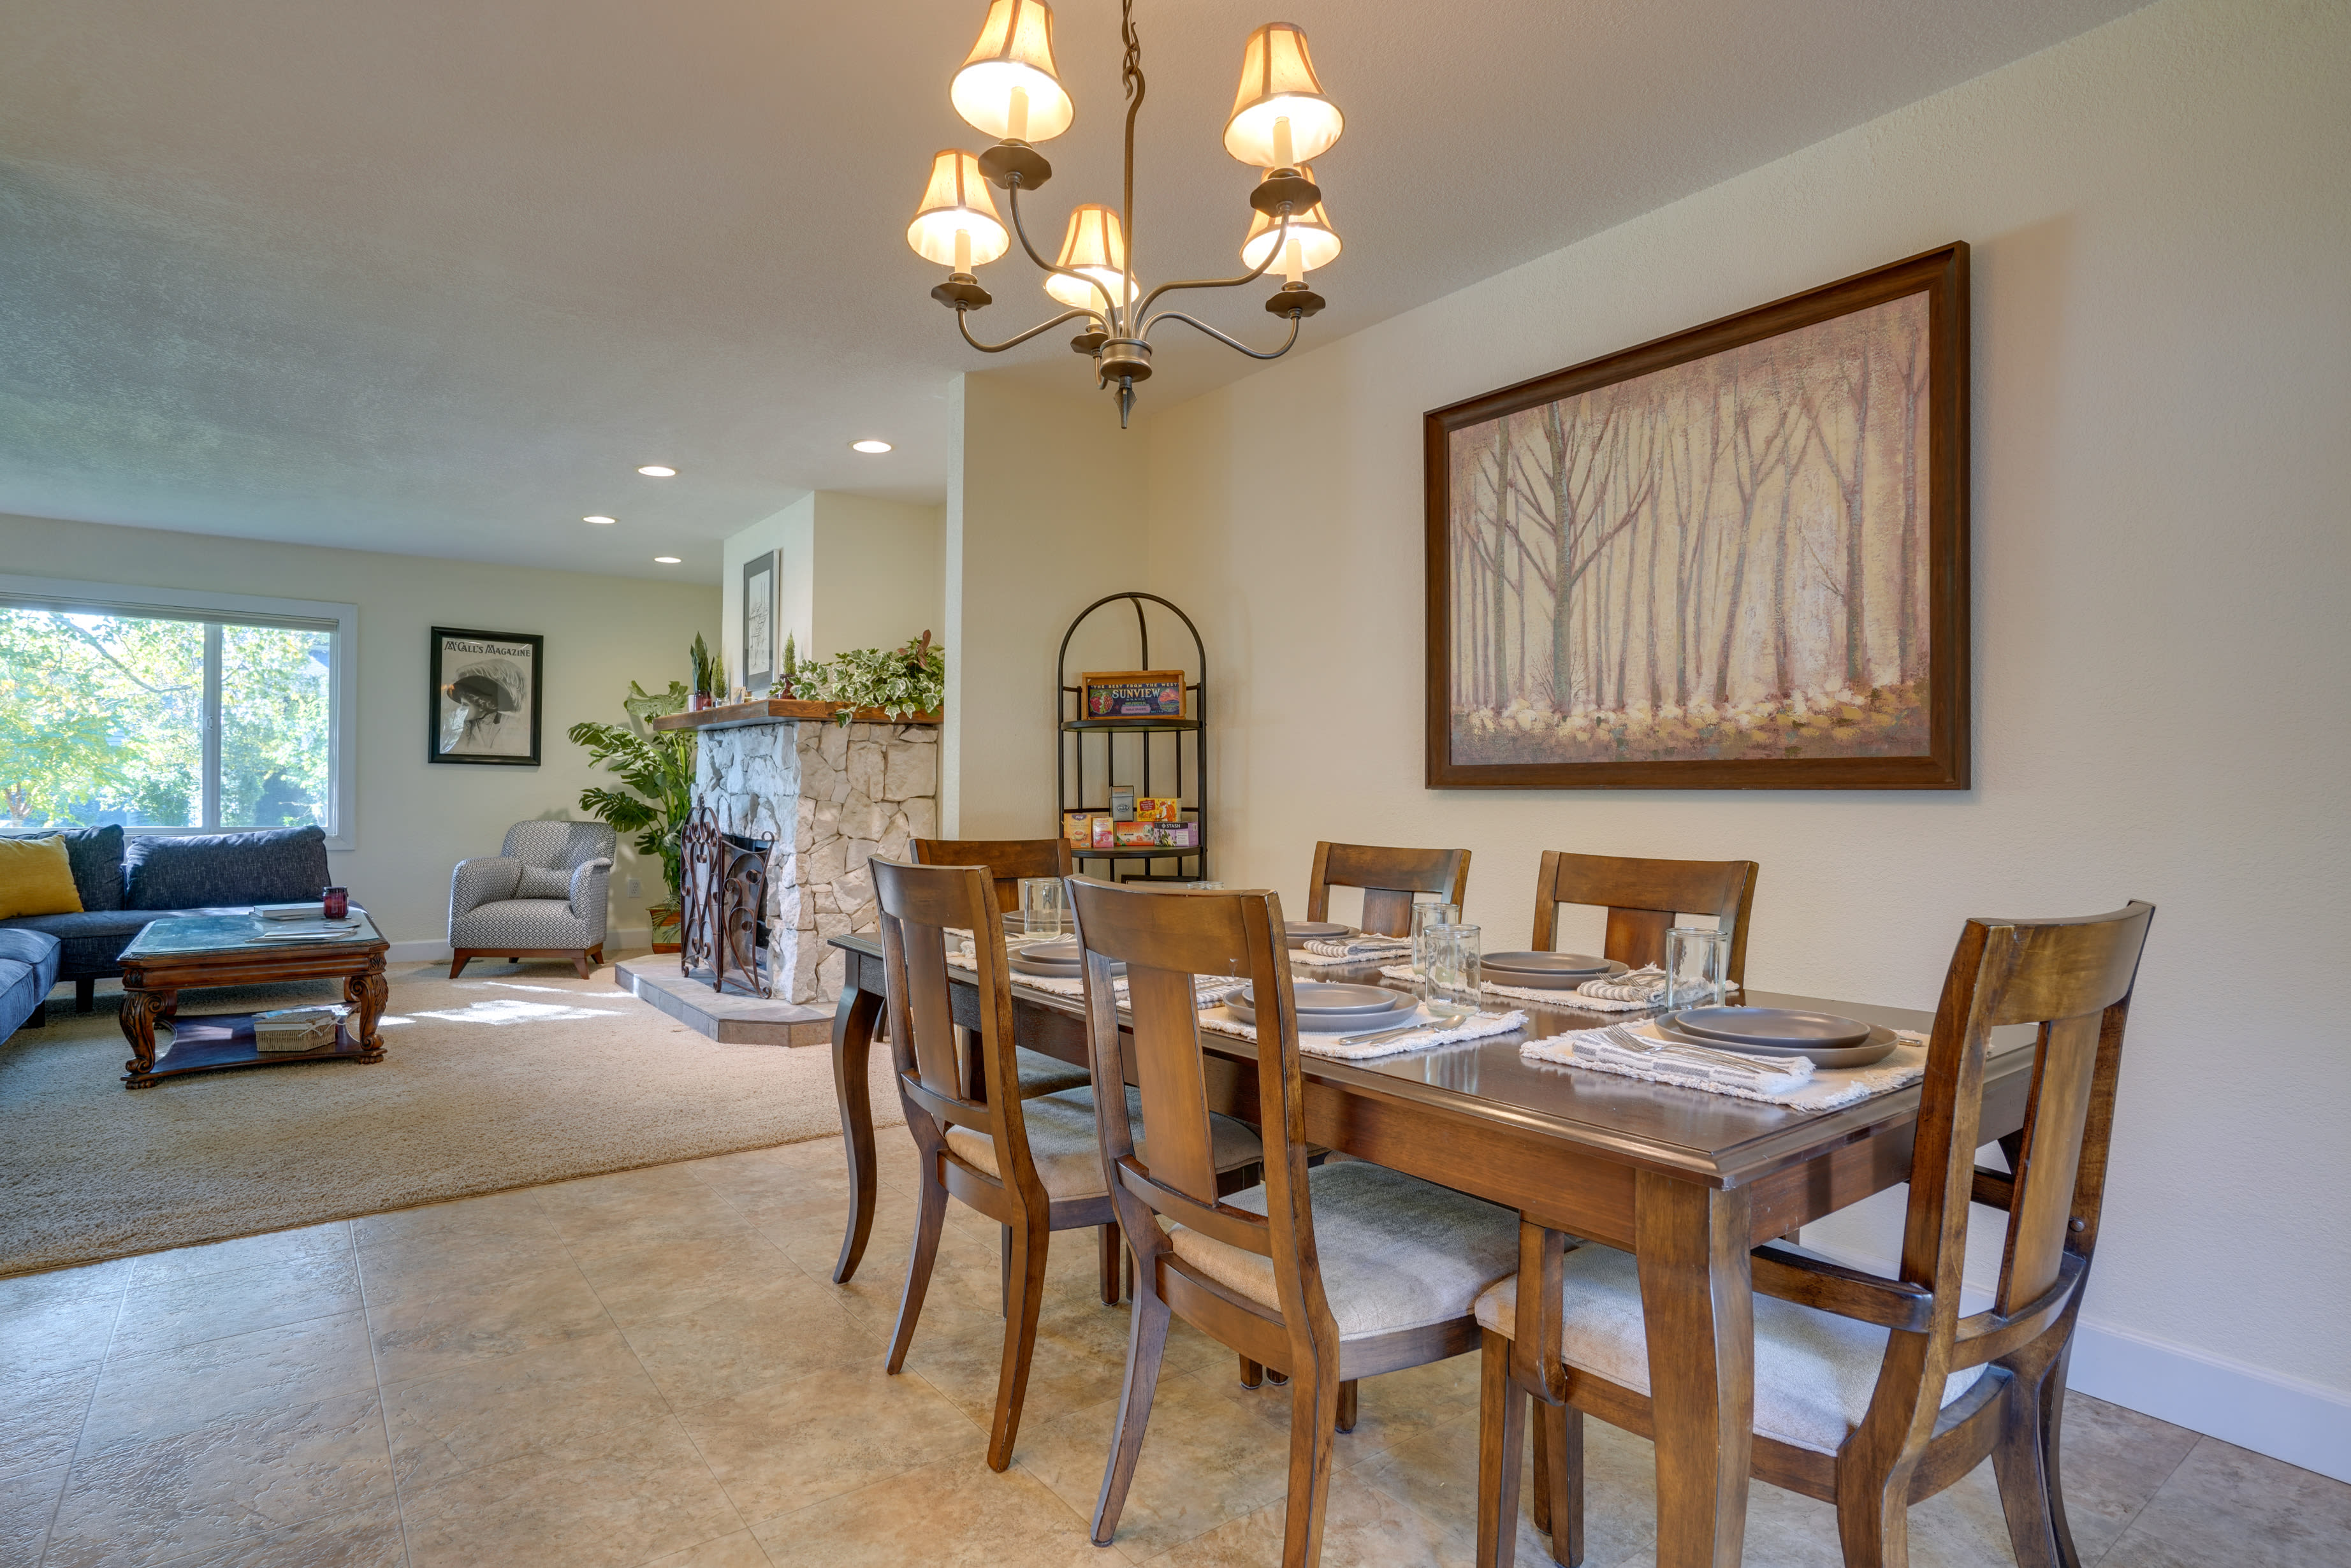 Dining Area | Dishware & Flatware Provided | Breakfast Bar w/ Additional Seating